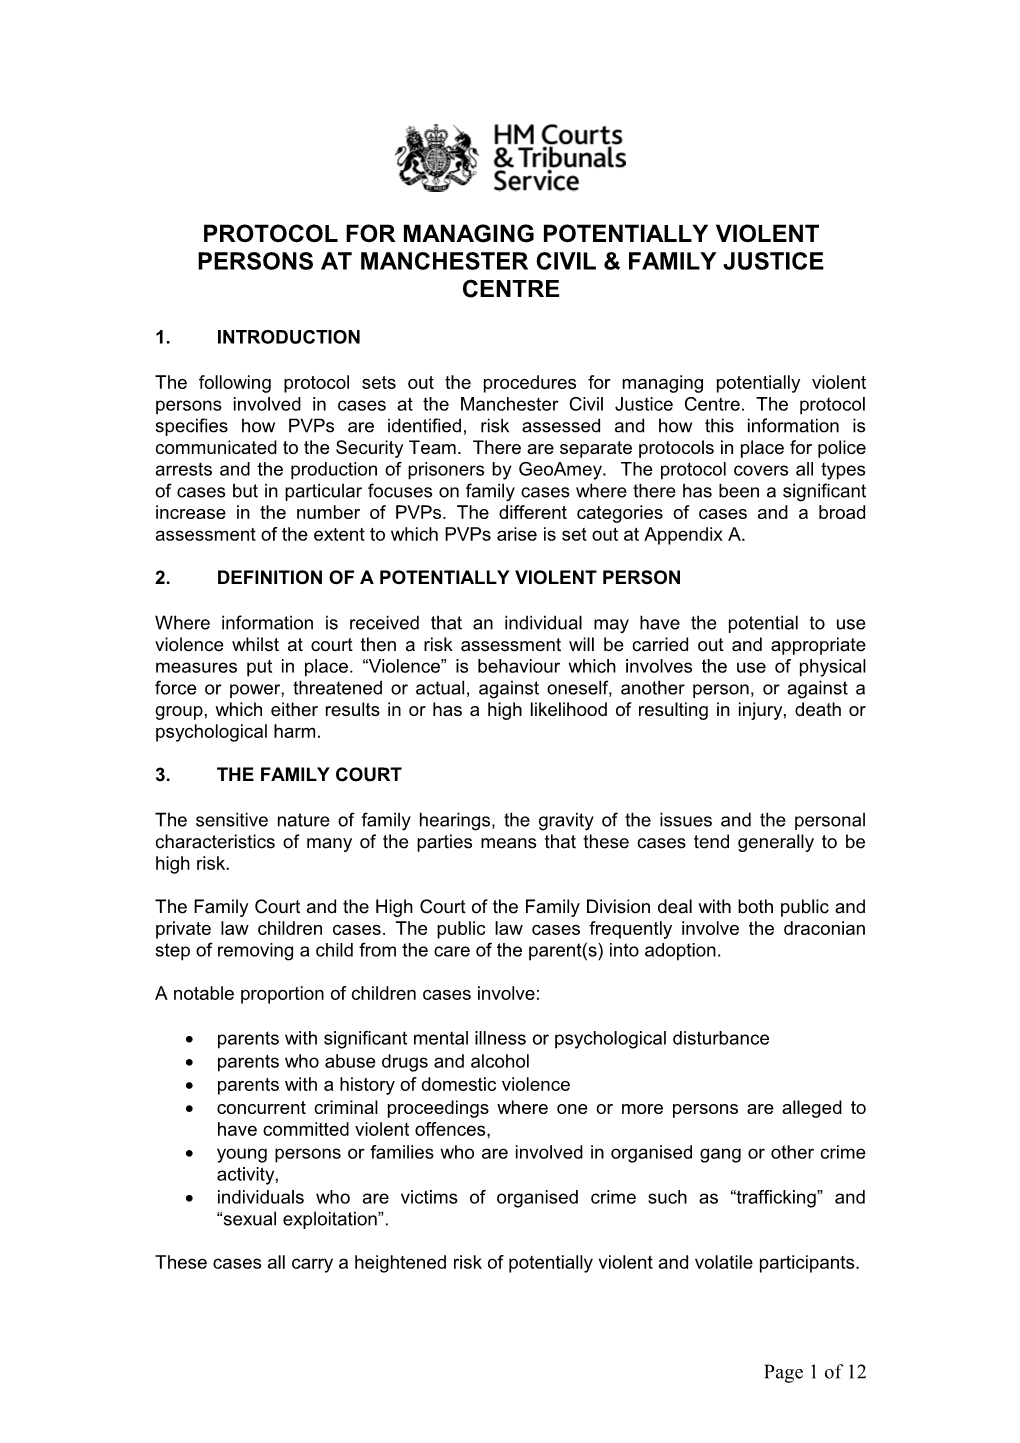 Protocol for Managing Potentially Violent Persons at Manchester Civil & Family Justice Centre